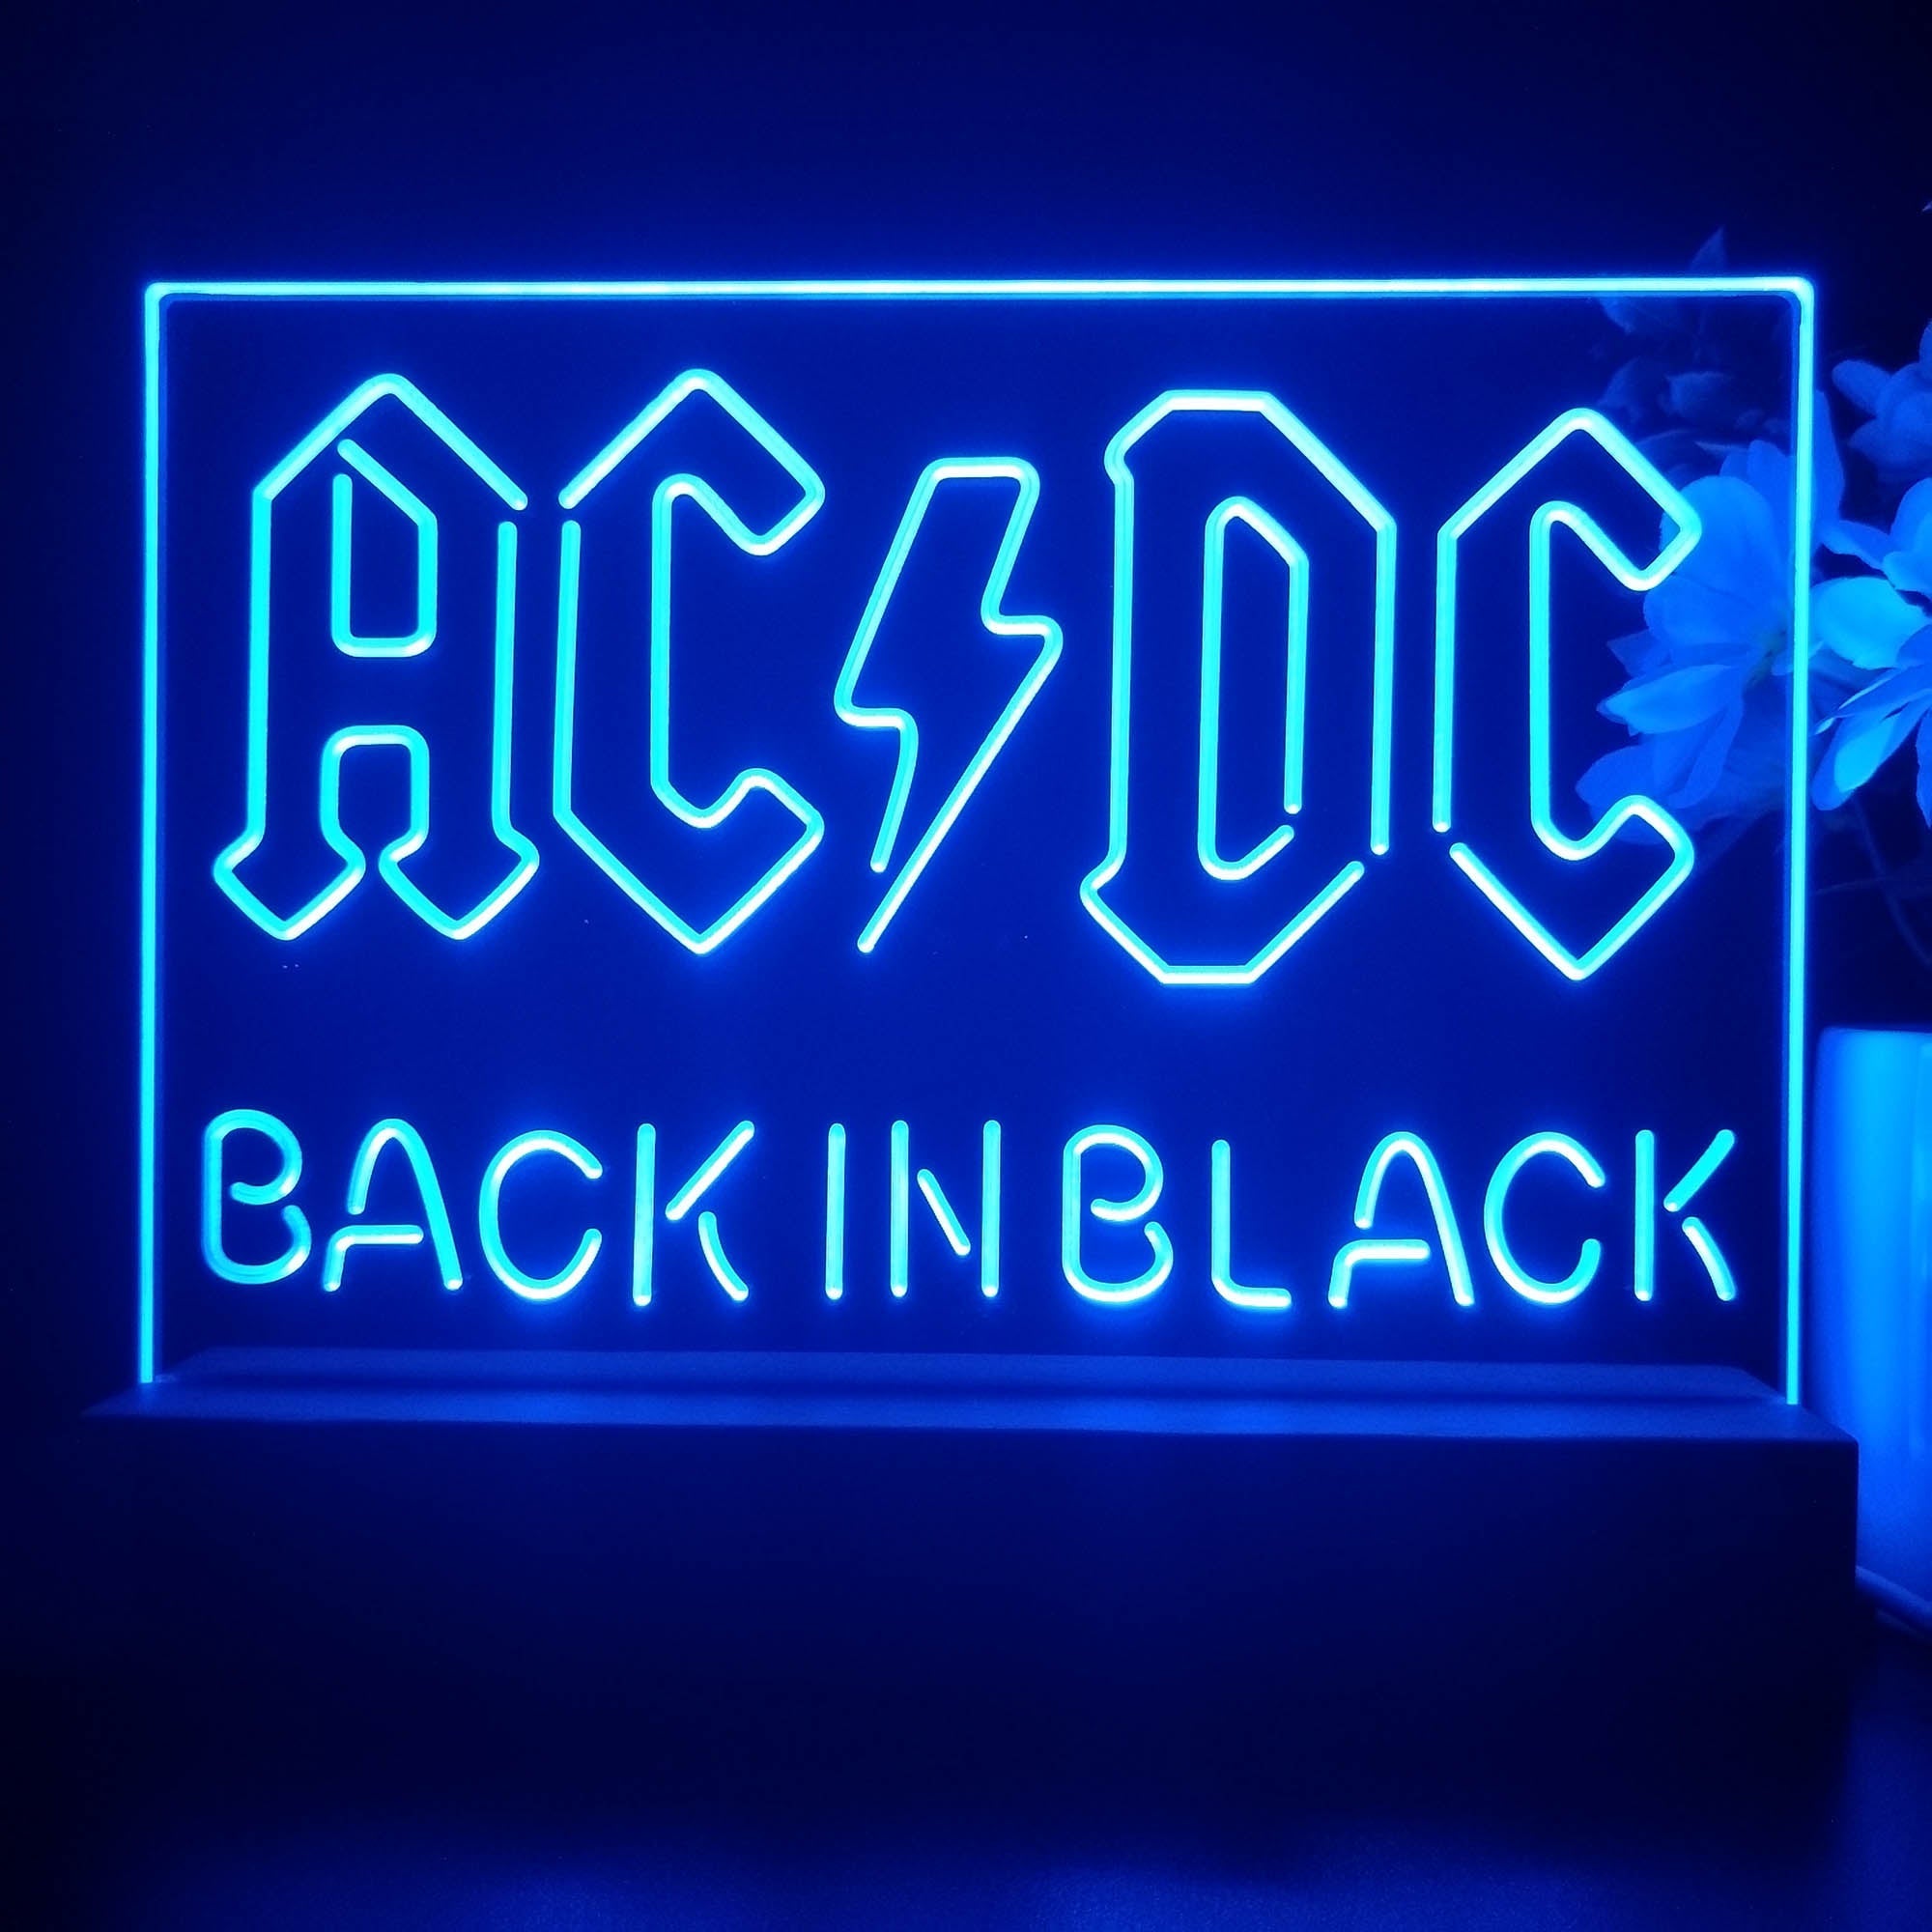 ACDC Back In Black Music Band 3D Illusion Night Light Desk Lamp